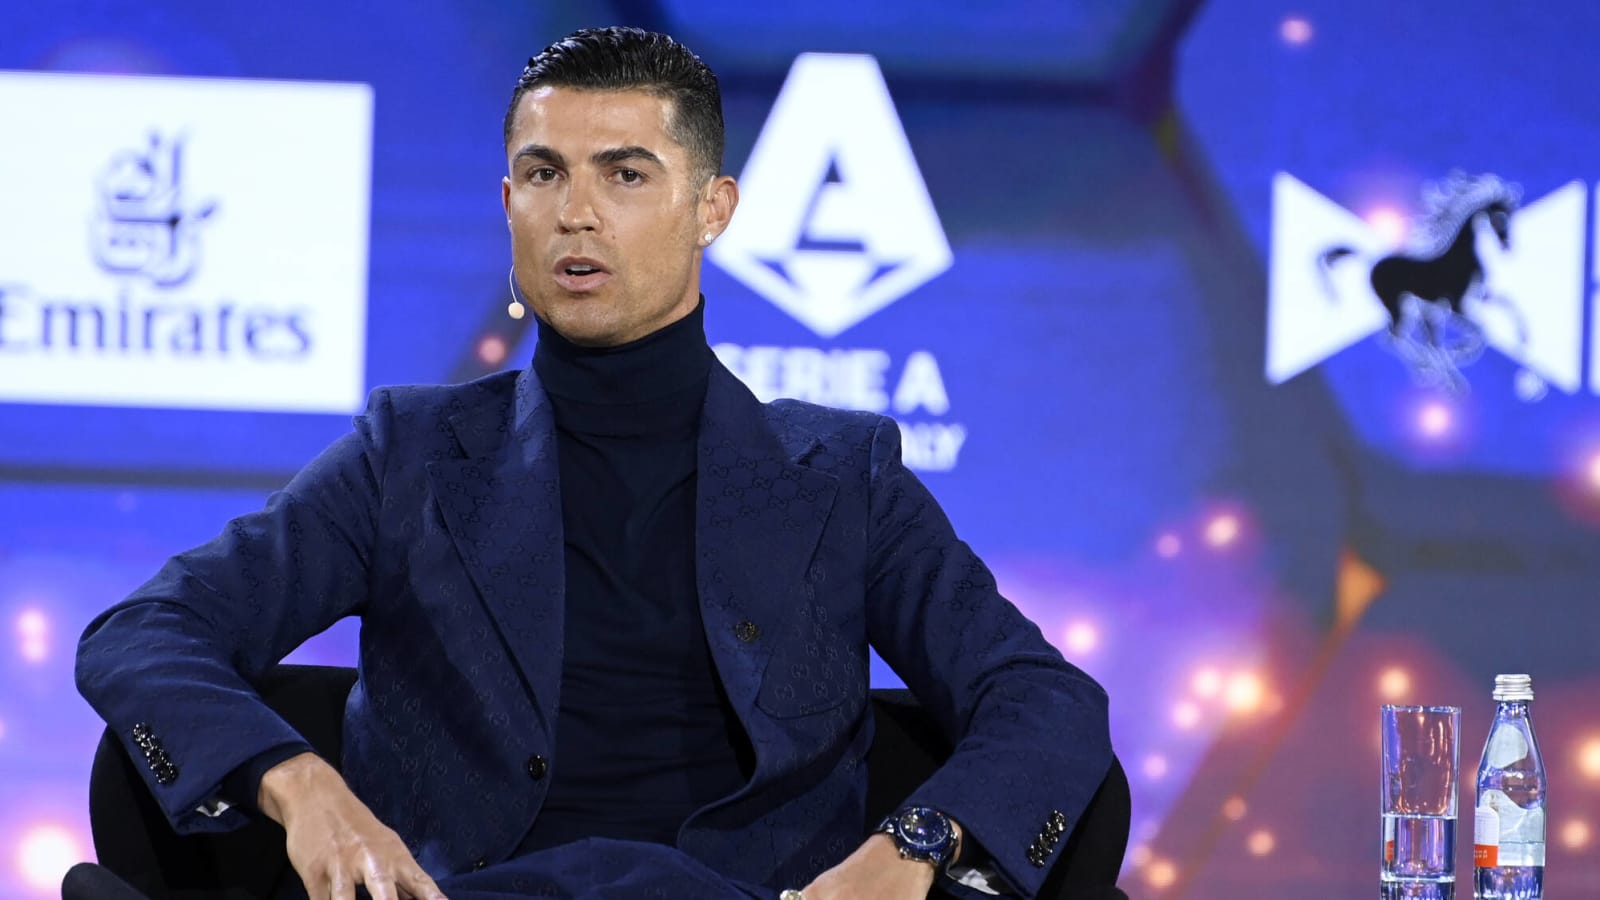 Star reveals Cristiano Ronaldo’s role in him sealing transfer away from Manchester United